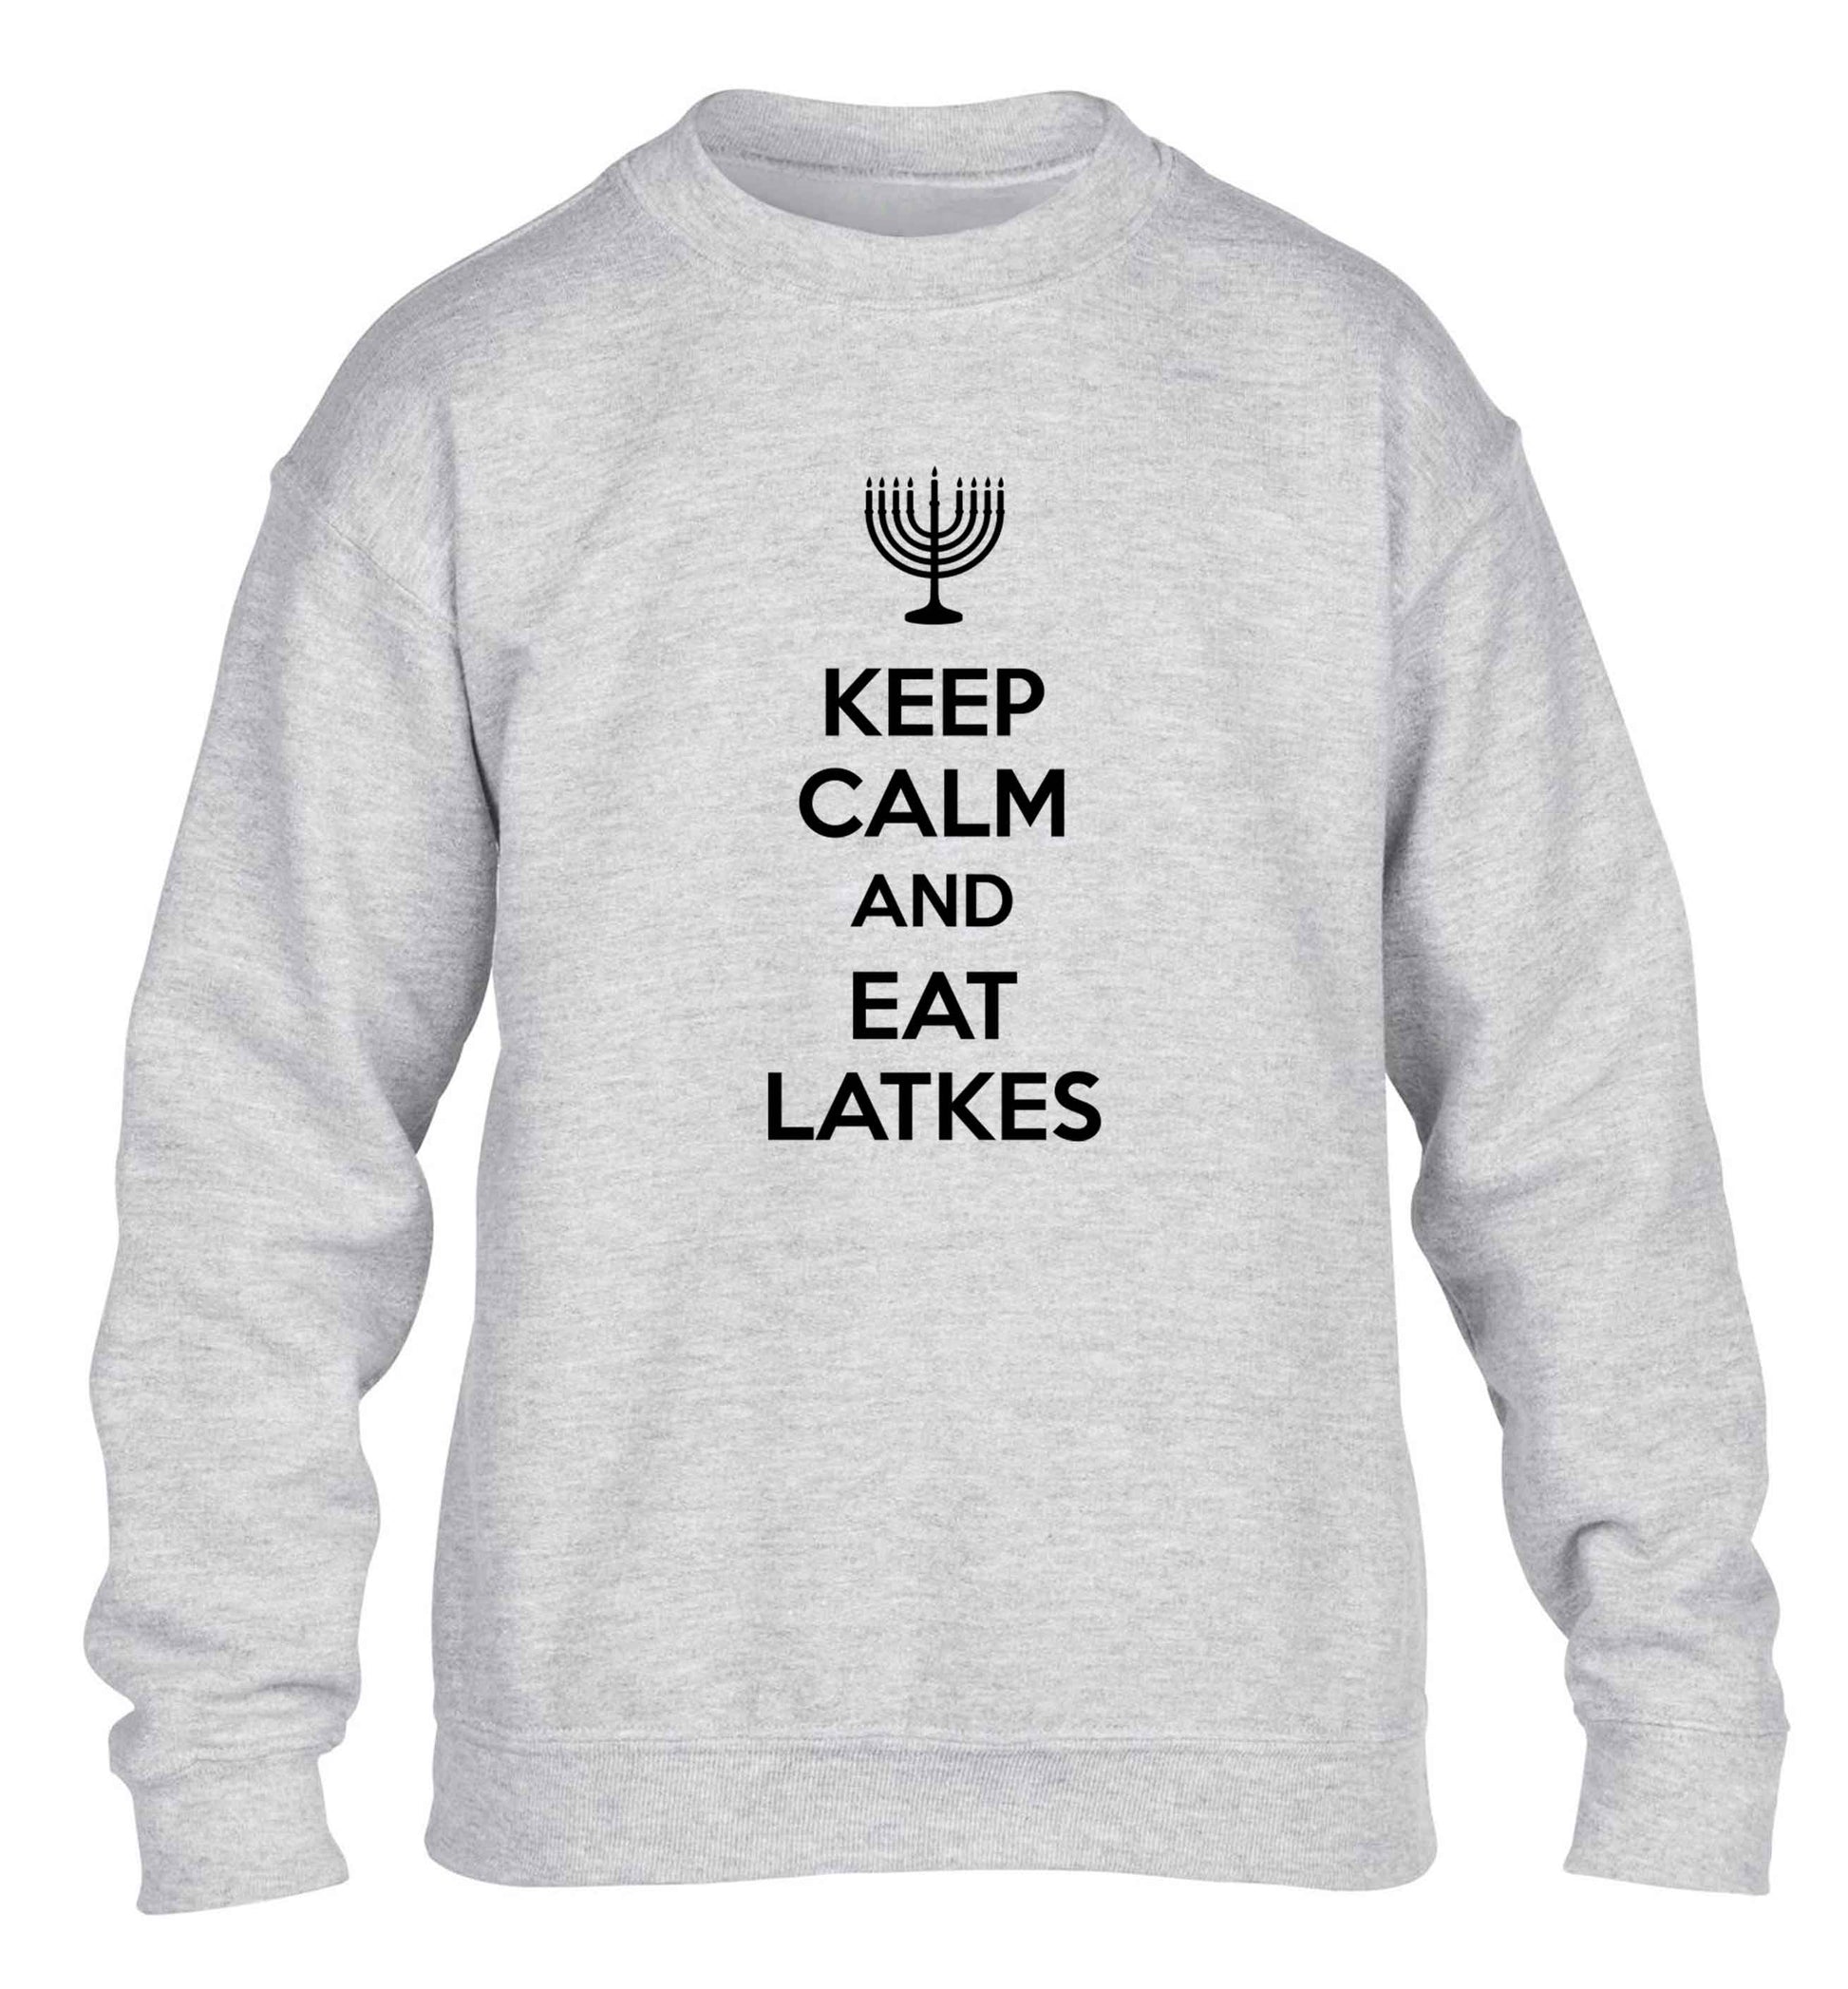 Keep calm and eat latkes children's grey sweater 12-13 Years